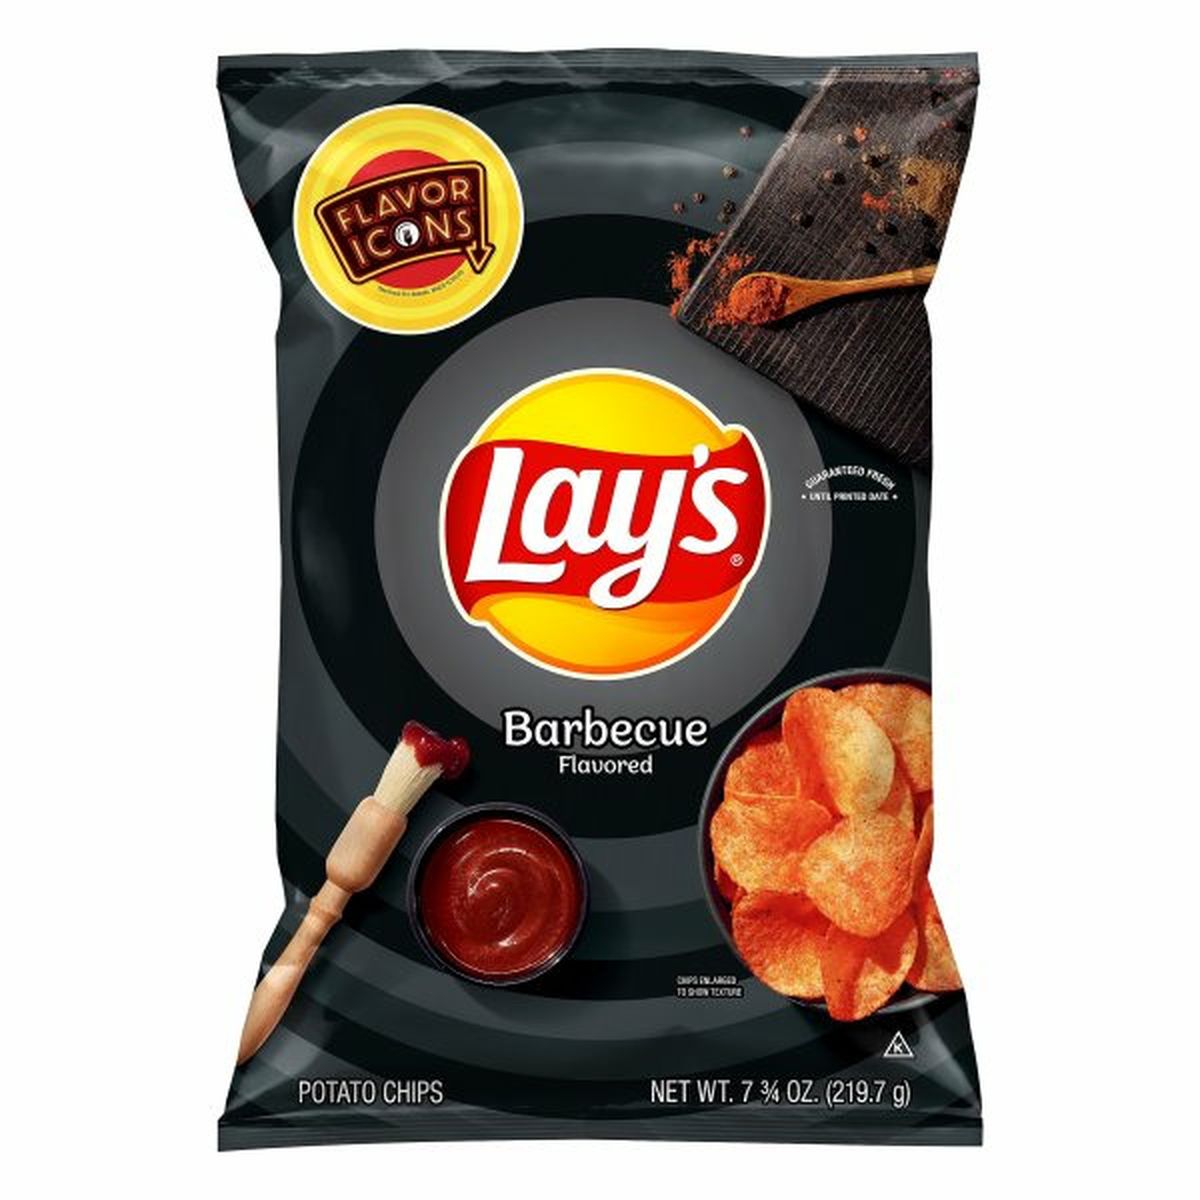 Calories in Lay's Potato Chips, Barbecue Flavored